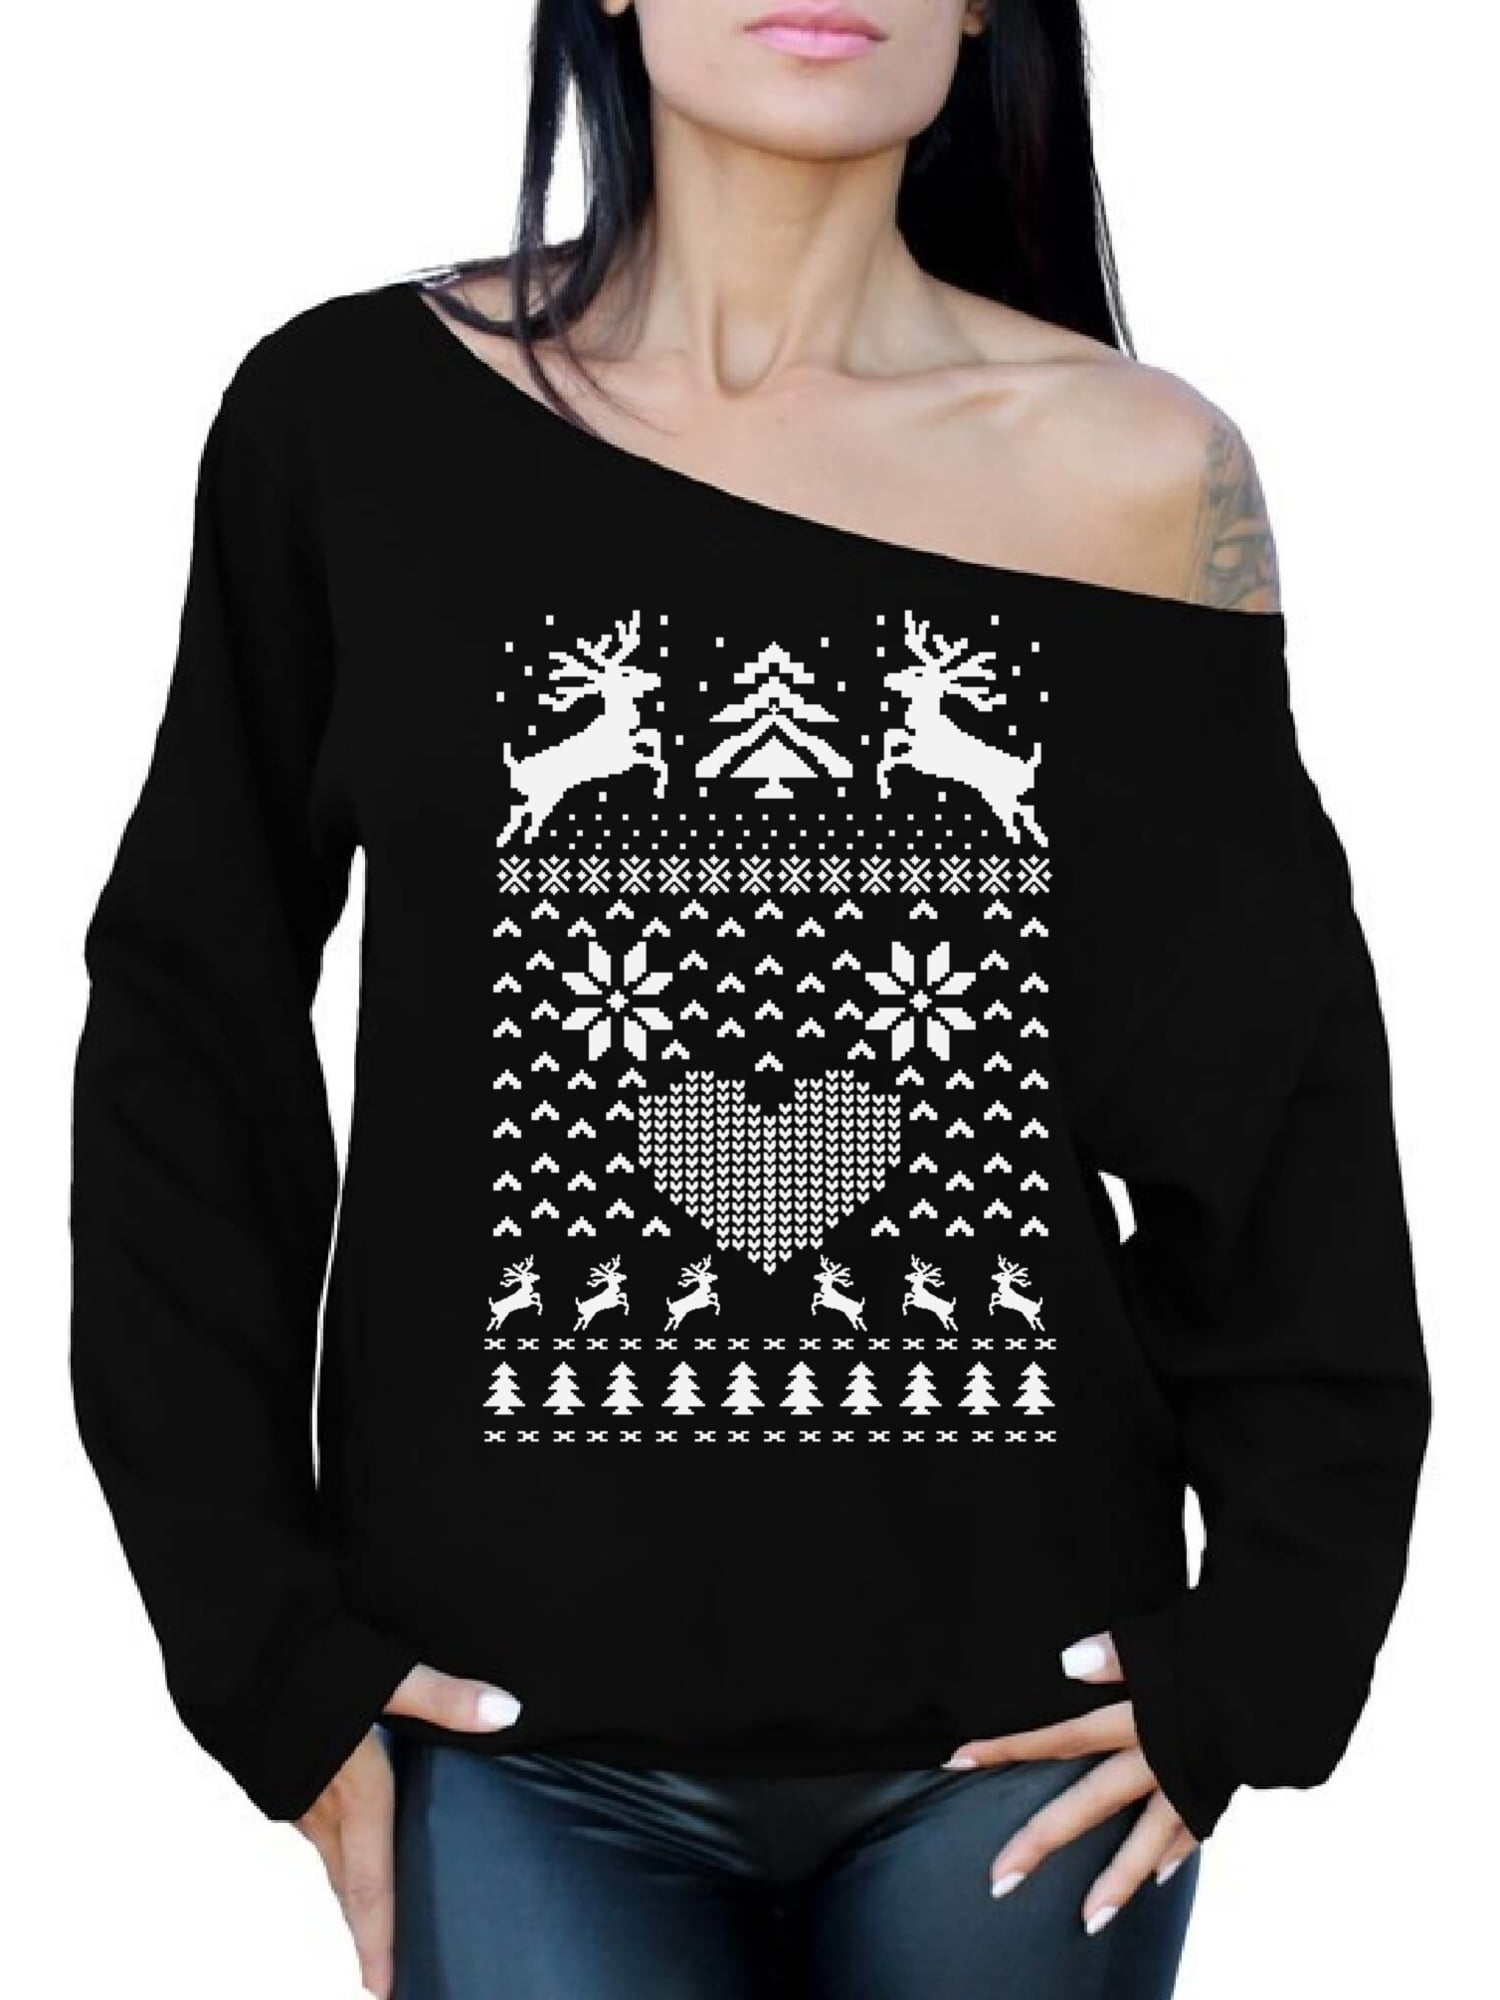 Gobble Gobble Gobble Sweatshirt Ugly Christmas Sweatshirt Off The Shoulder Gobble Gobble Gobble Slouchy Oversized Top For Women Xmas Gifts